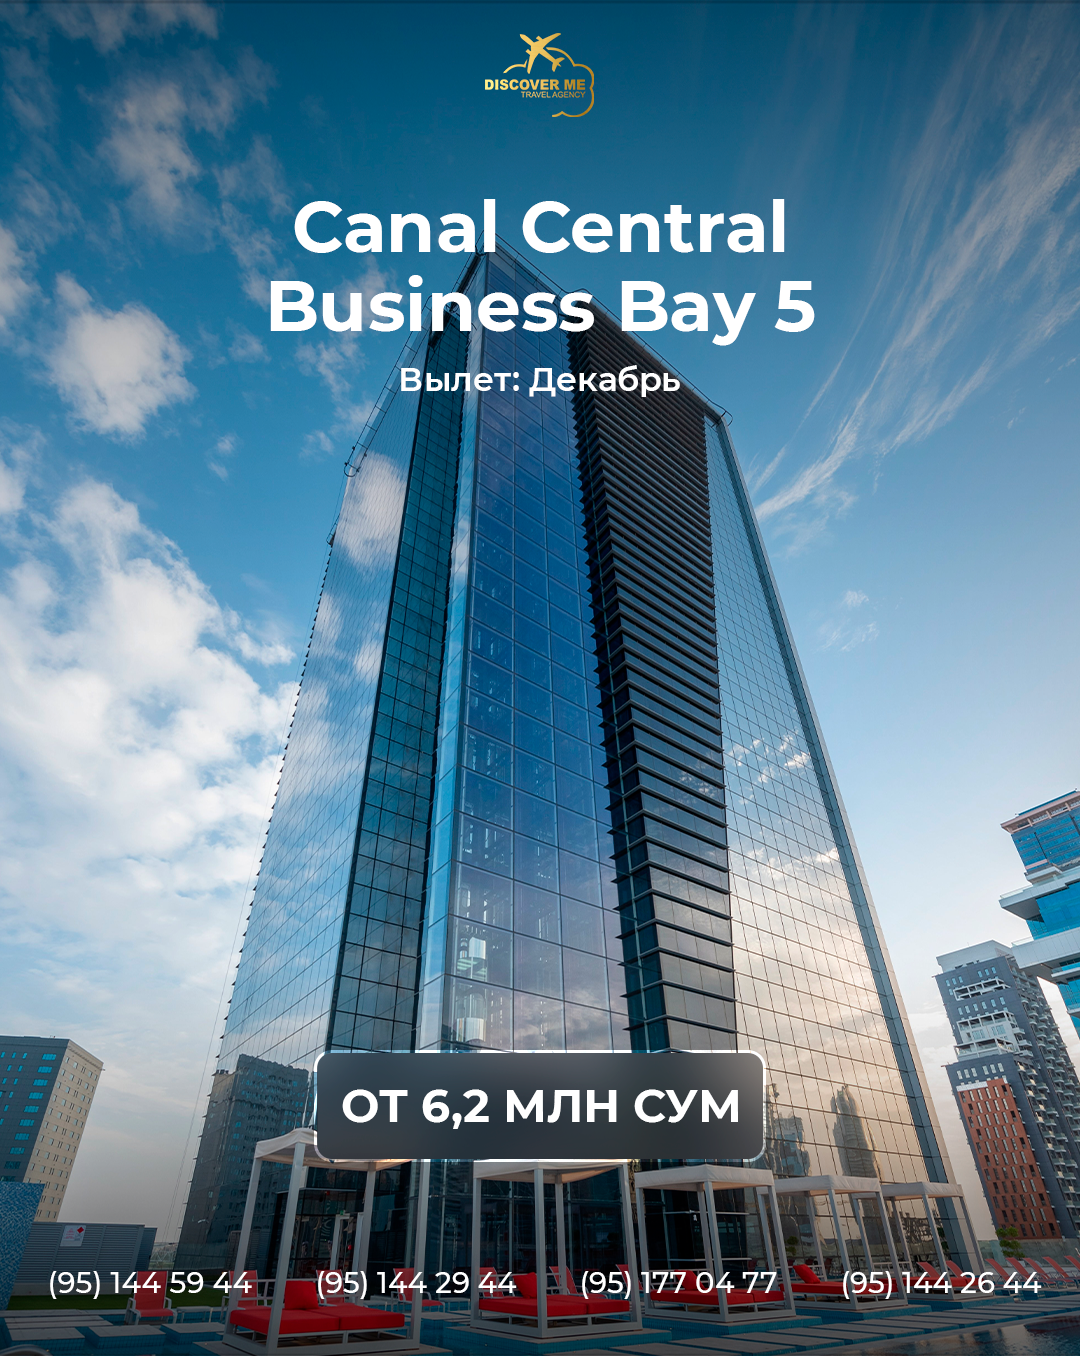 Central canal. Canal Central Business Bay 5. Canal Central Business Bay 5 бизнес Бэй. Business Bay Dubai. Canal Central Hotel.